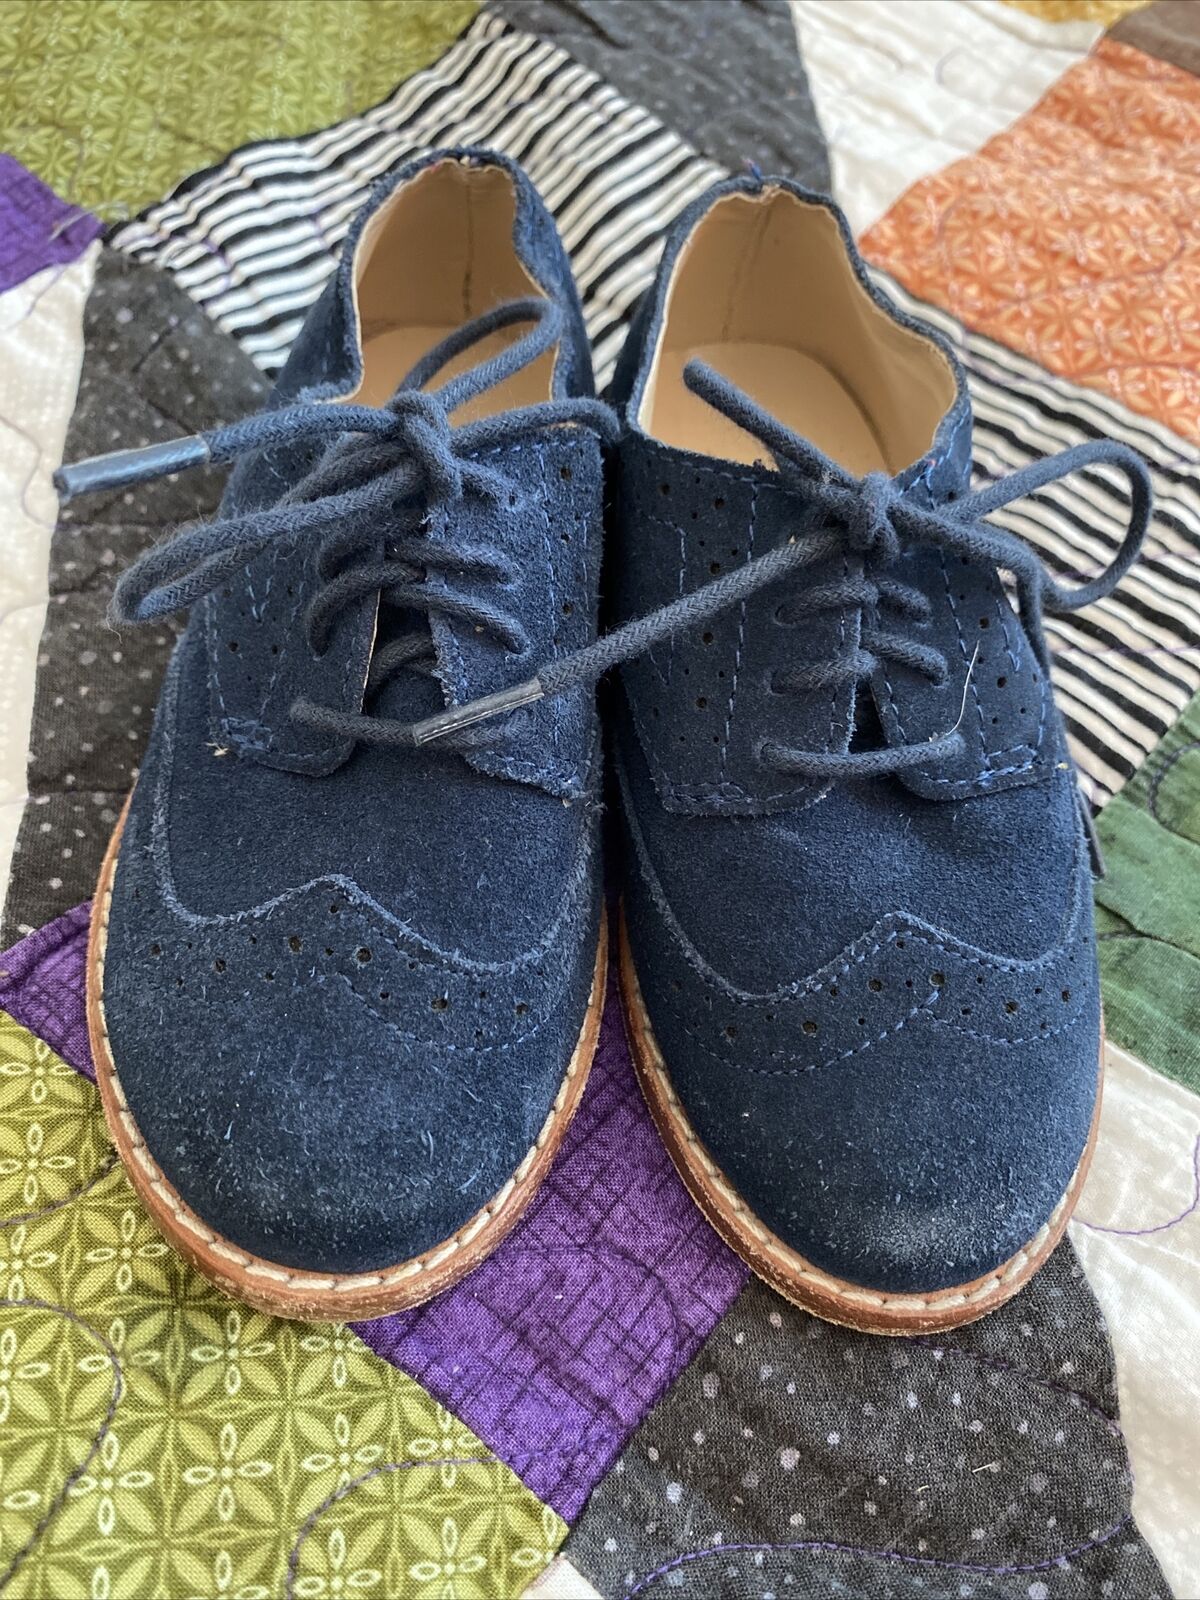 JANIE AND JACK NAVY BLUE OXFORD SUEDE DRESS SHOES - BOYS YOUTH KIDS SIZE 6